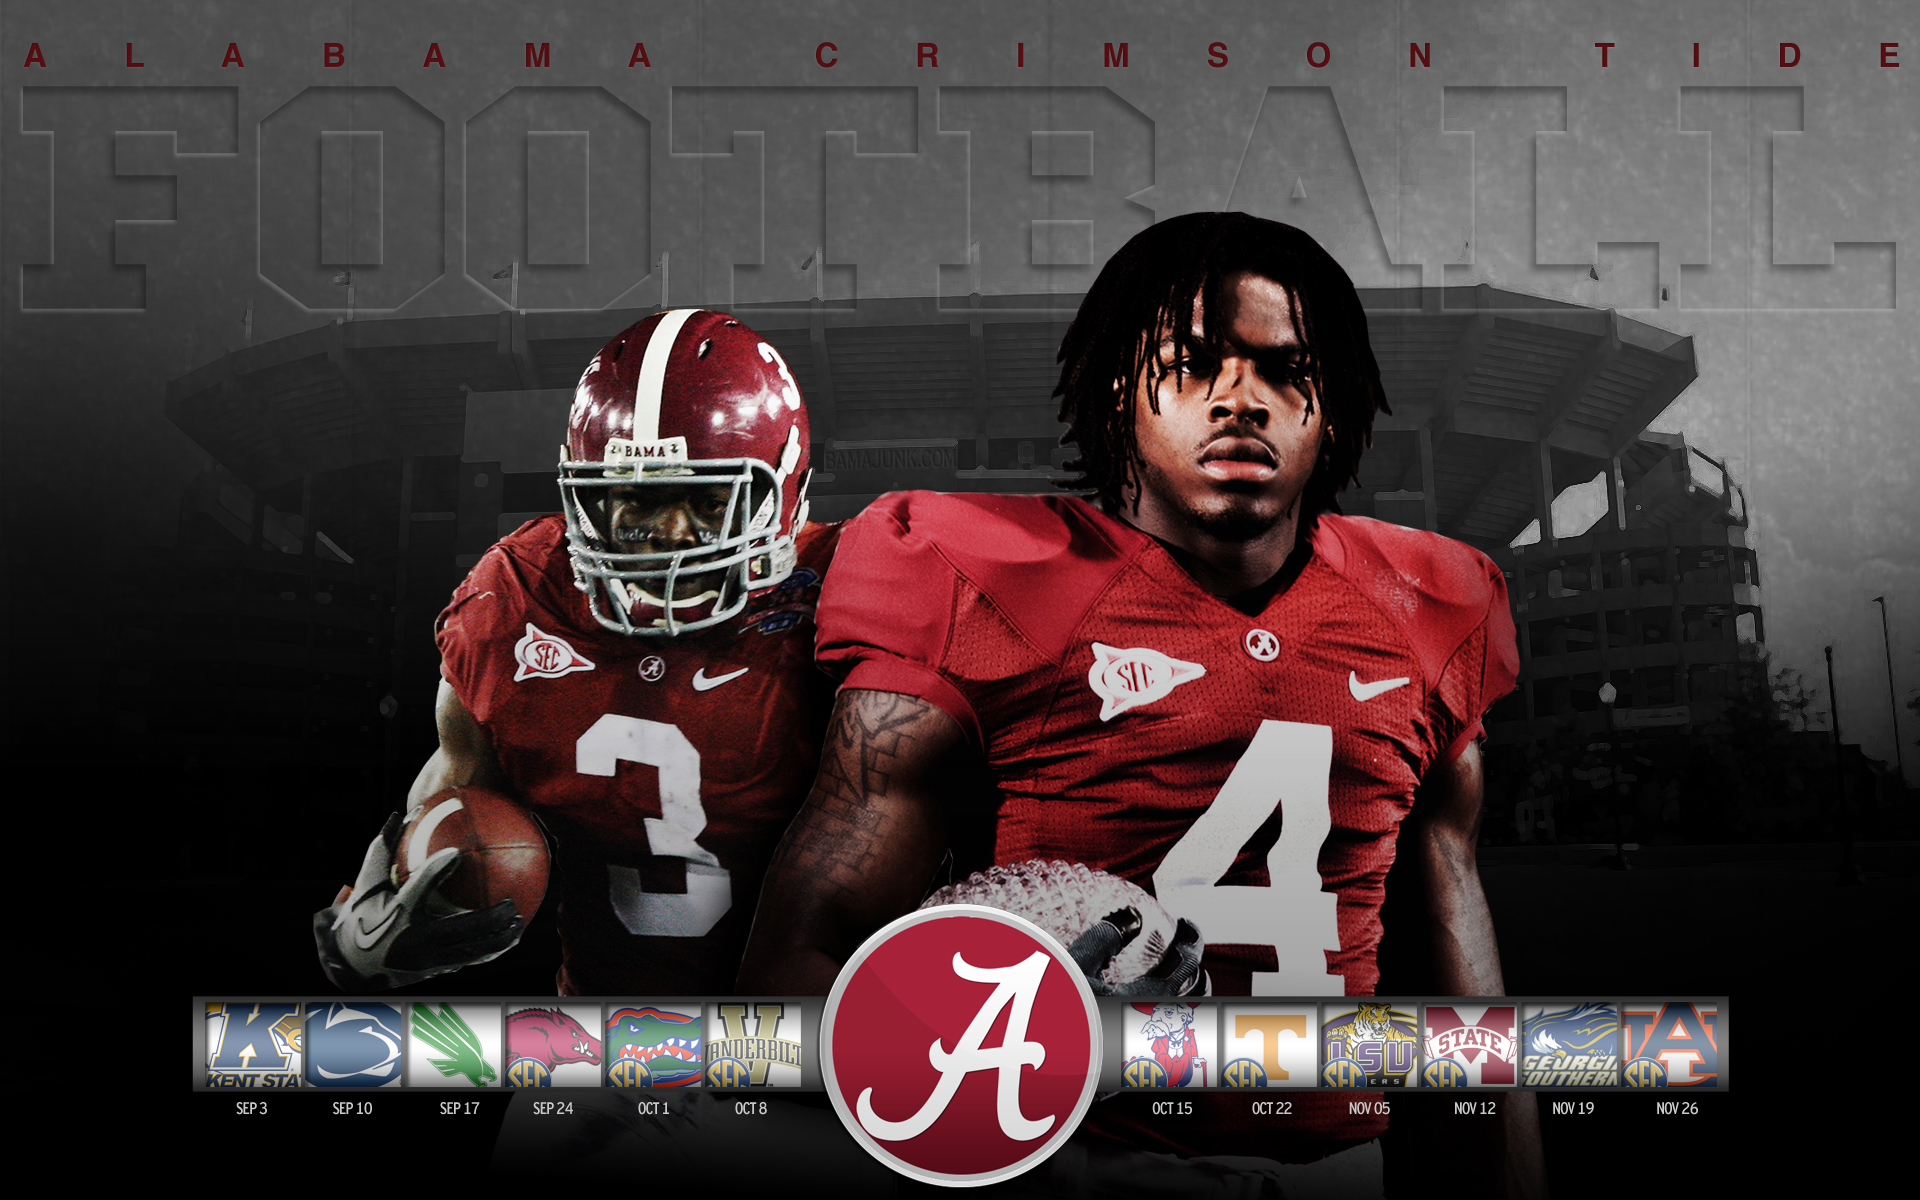  alabama football schedule reviewed by BBT times rated